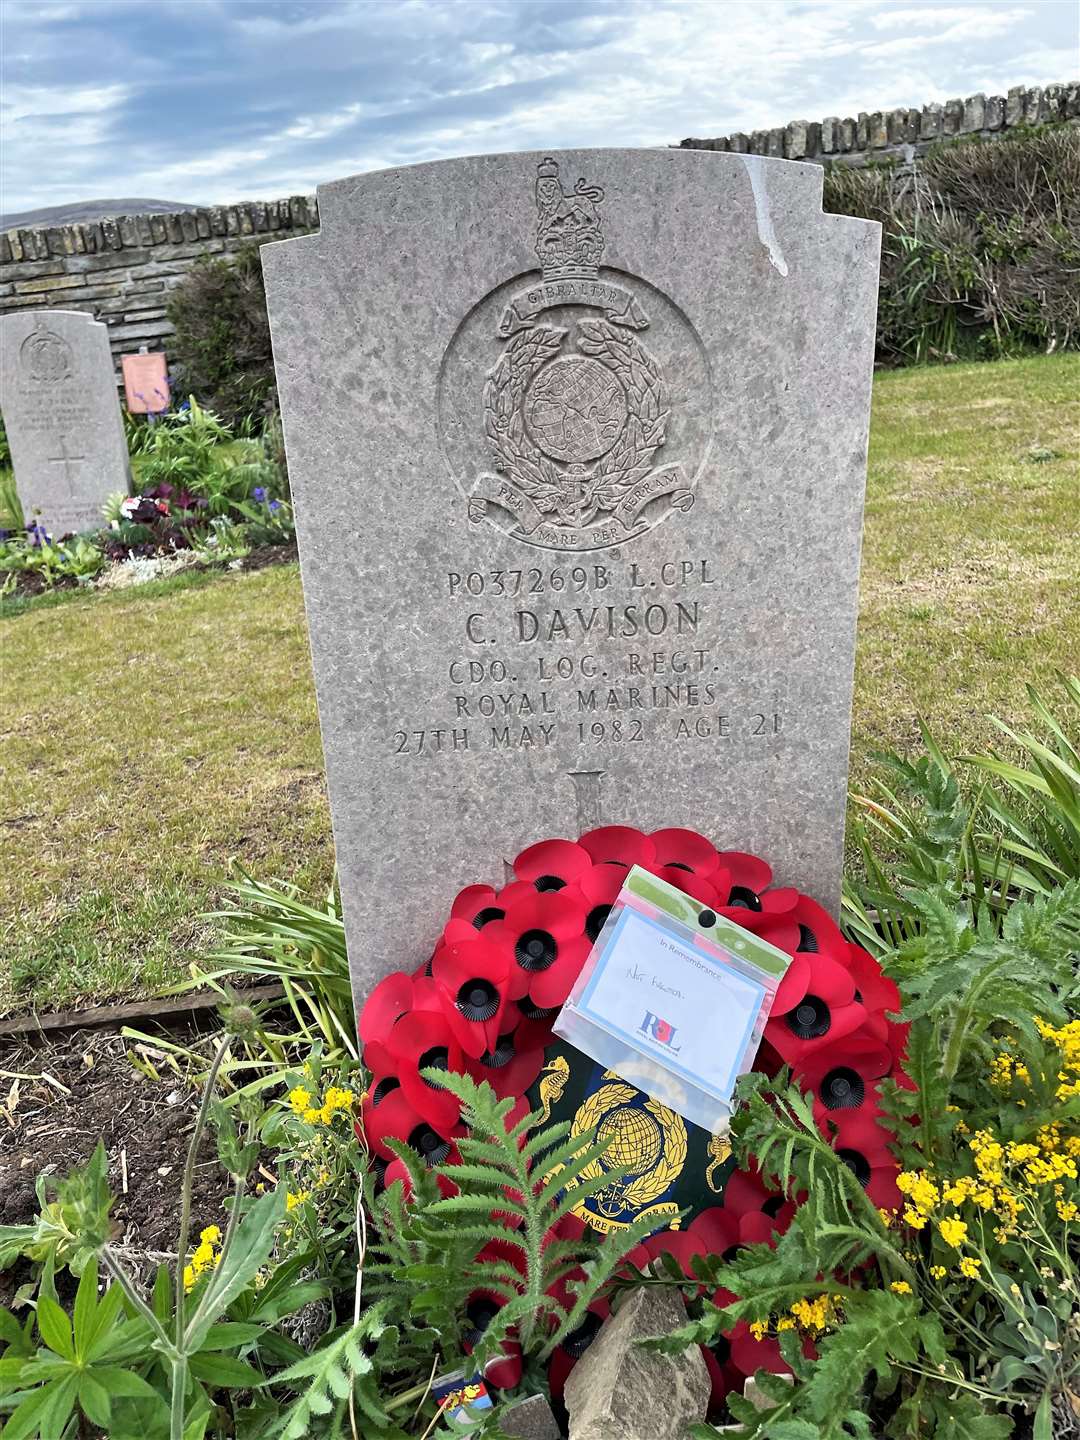 John placed a Remembrance poppy on the grave of Lance Corporal Geordie Davison's headstone at San Carlos Cemetery.